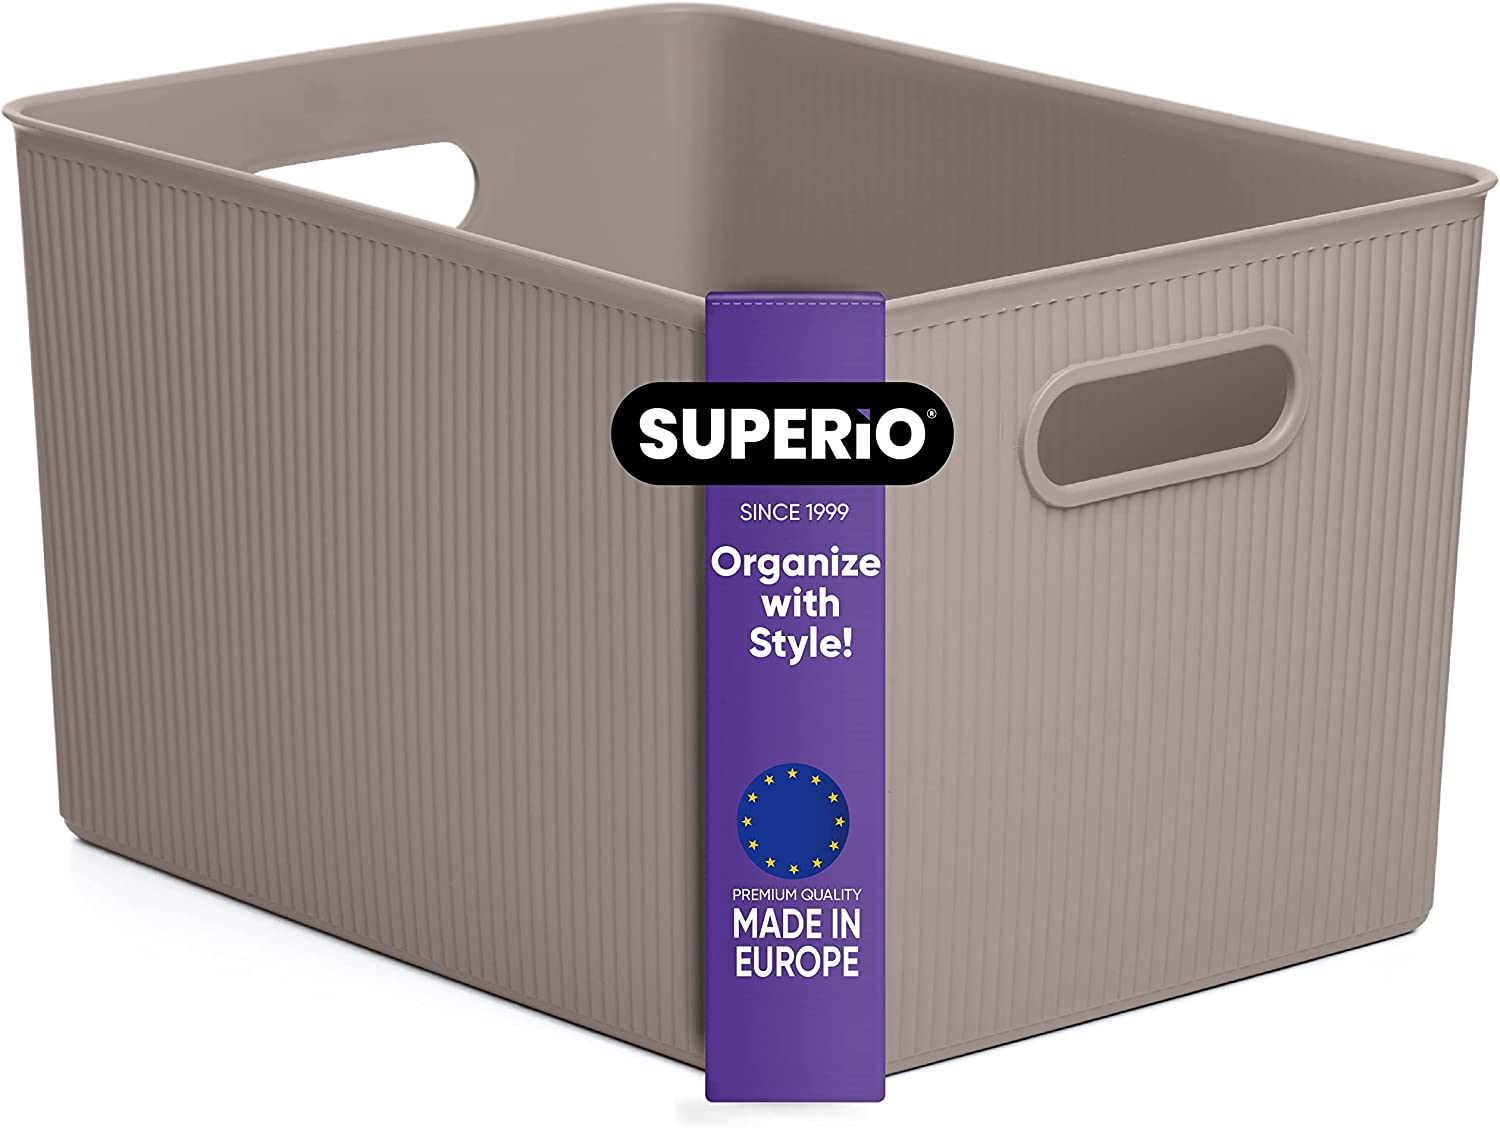 Superio Clear Storage Box with Lid, 22 Quart Plastic Container Bins for  Organizing, Stackable Crate, Storage Bin Organizer for Home, Office,  School